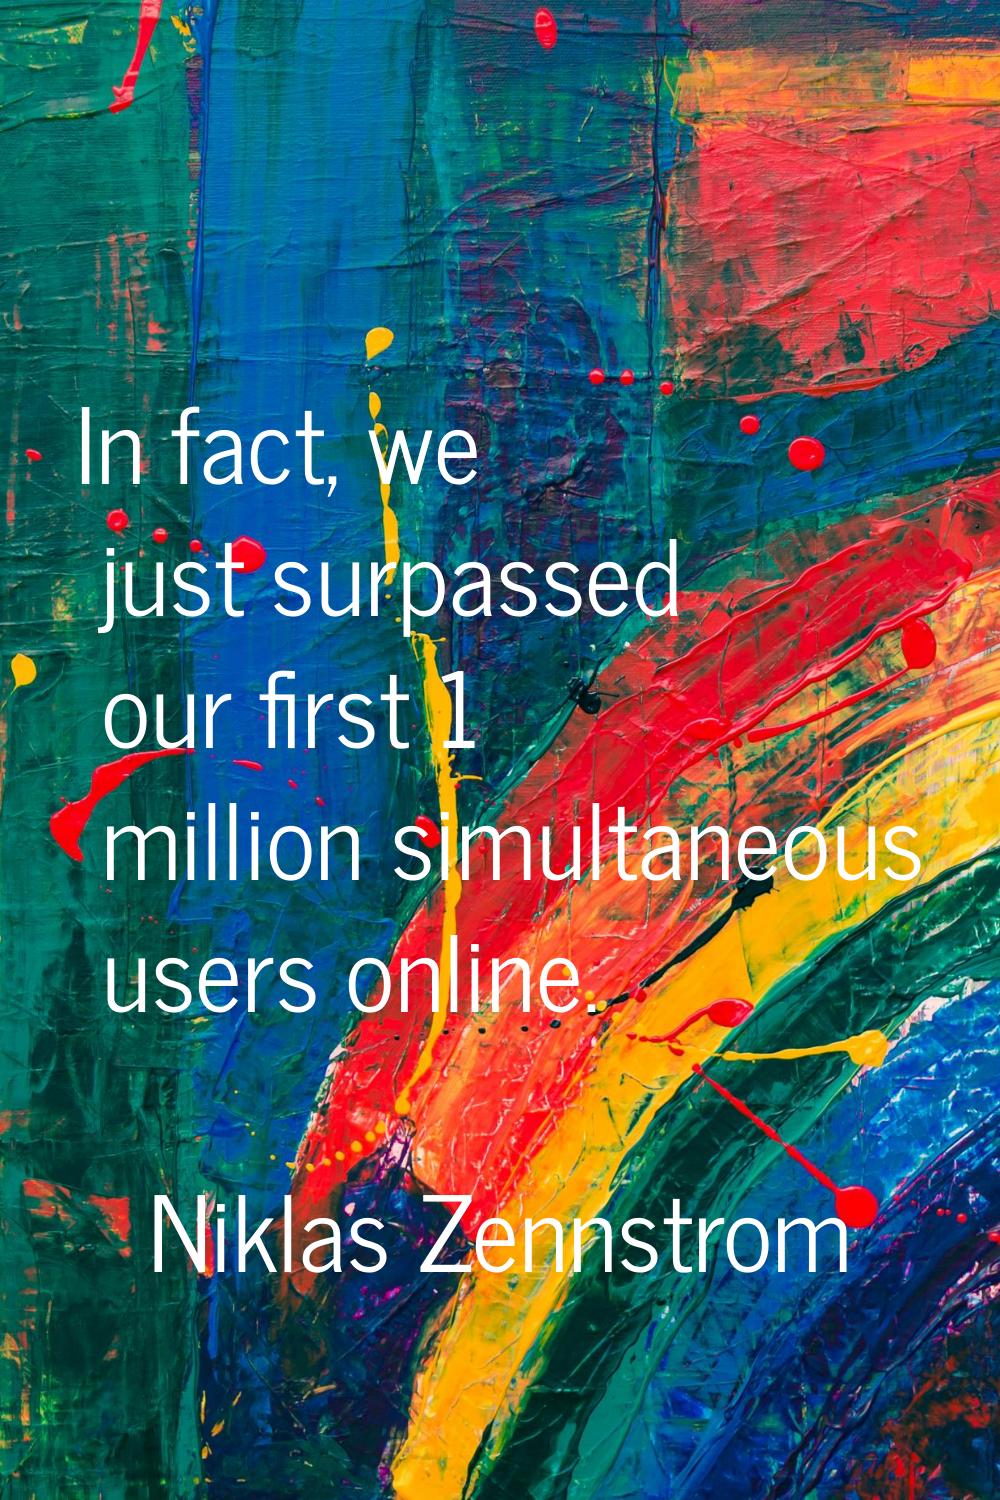 In fact, we just surpassed our first 1 million simultaneous users online.